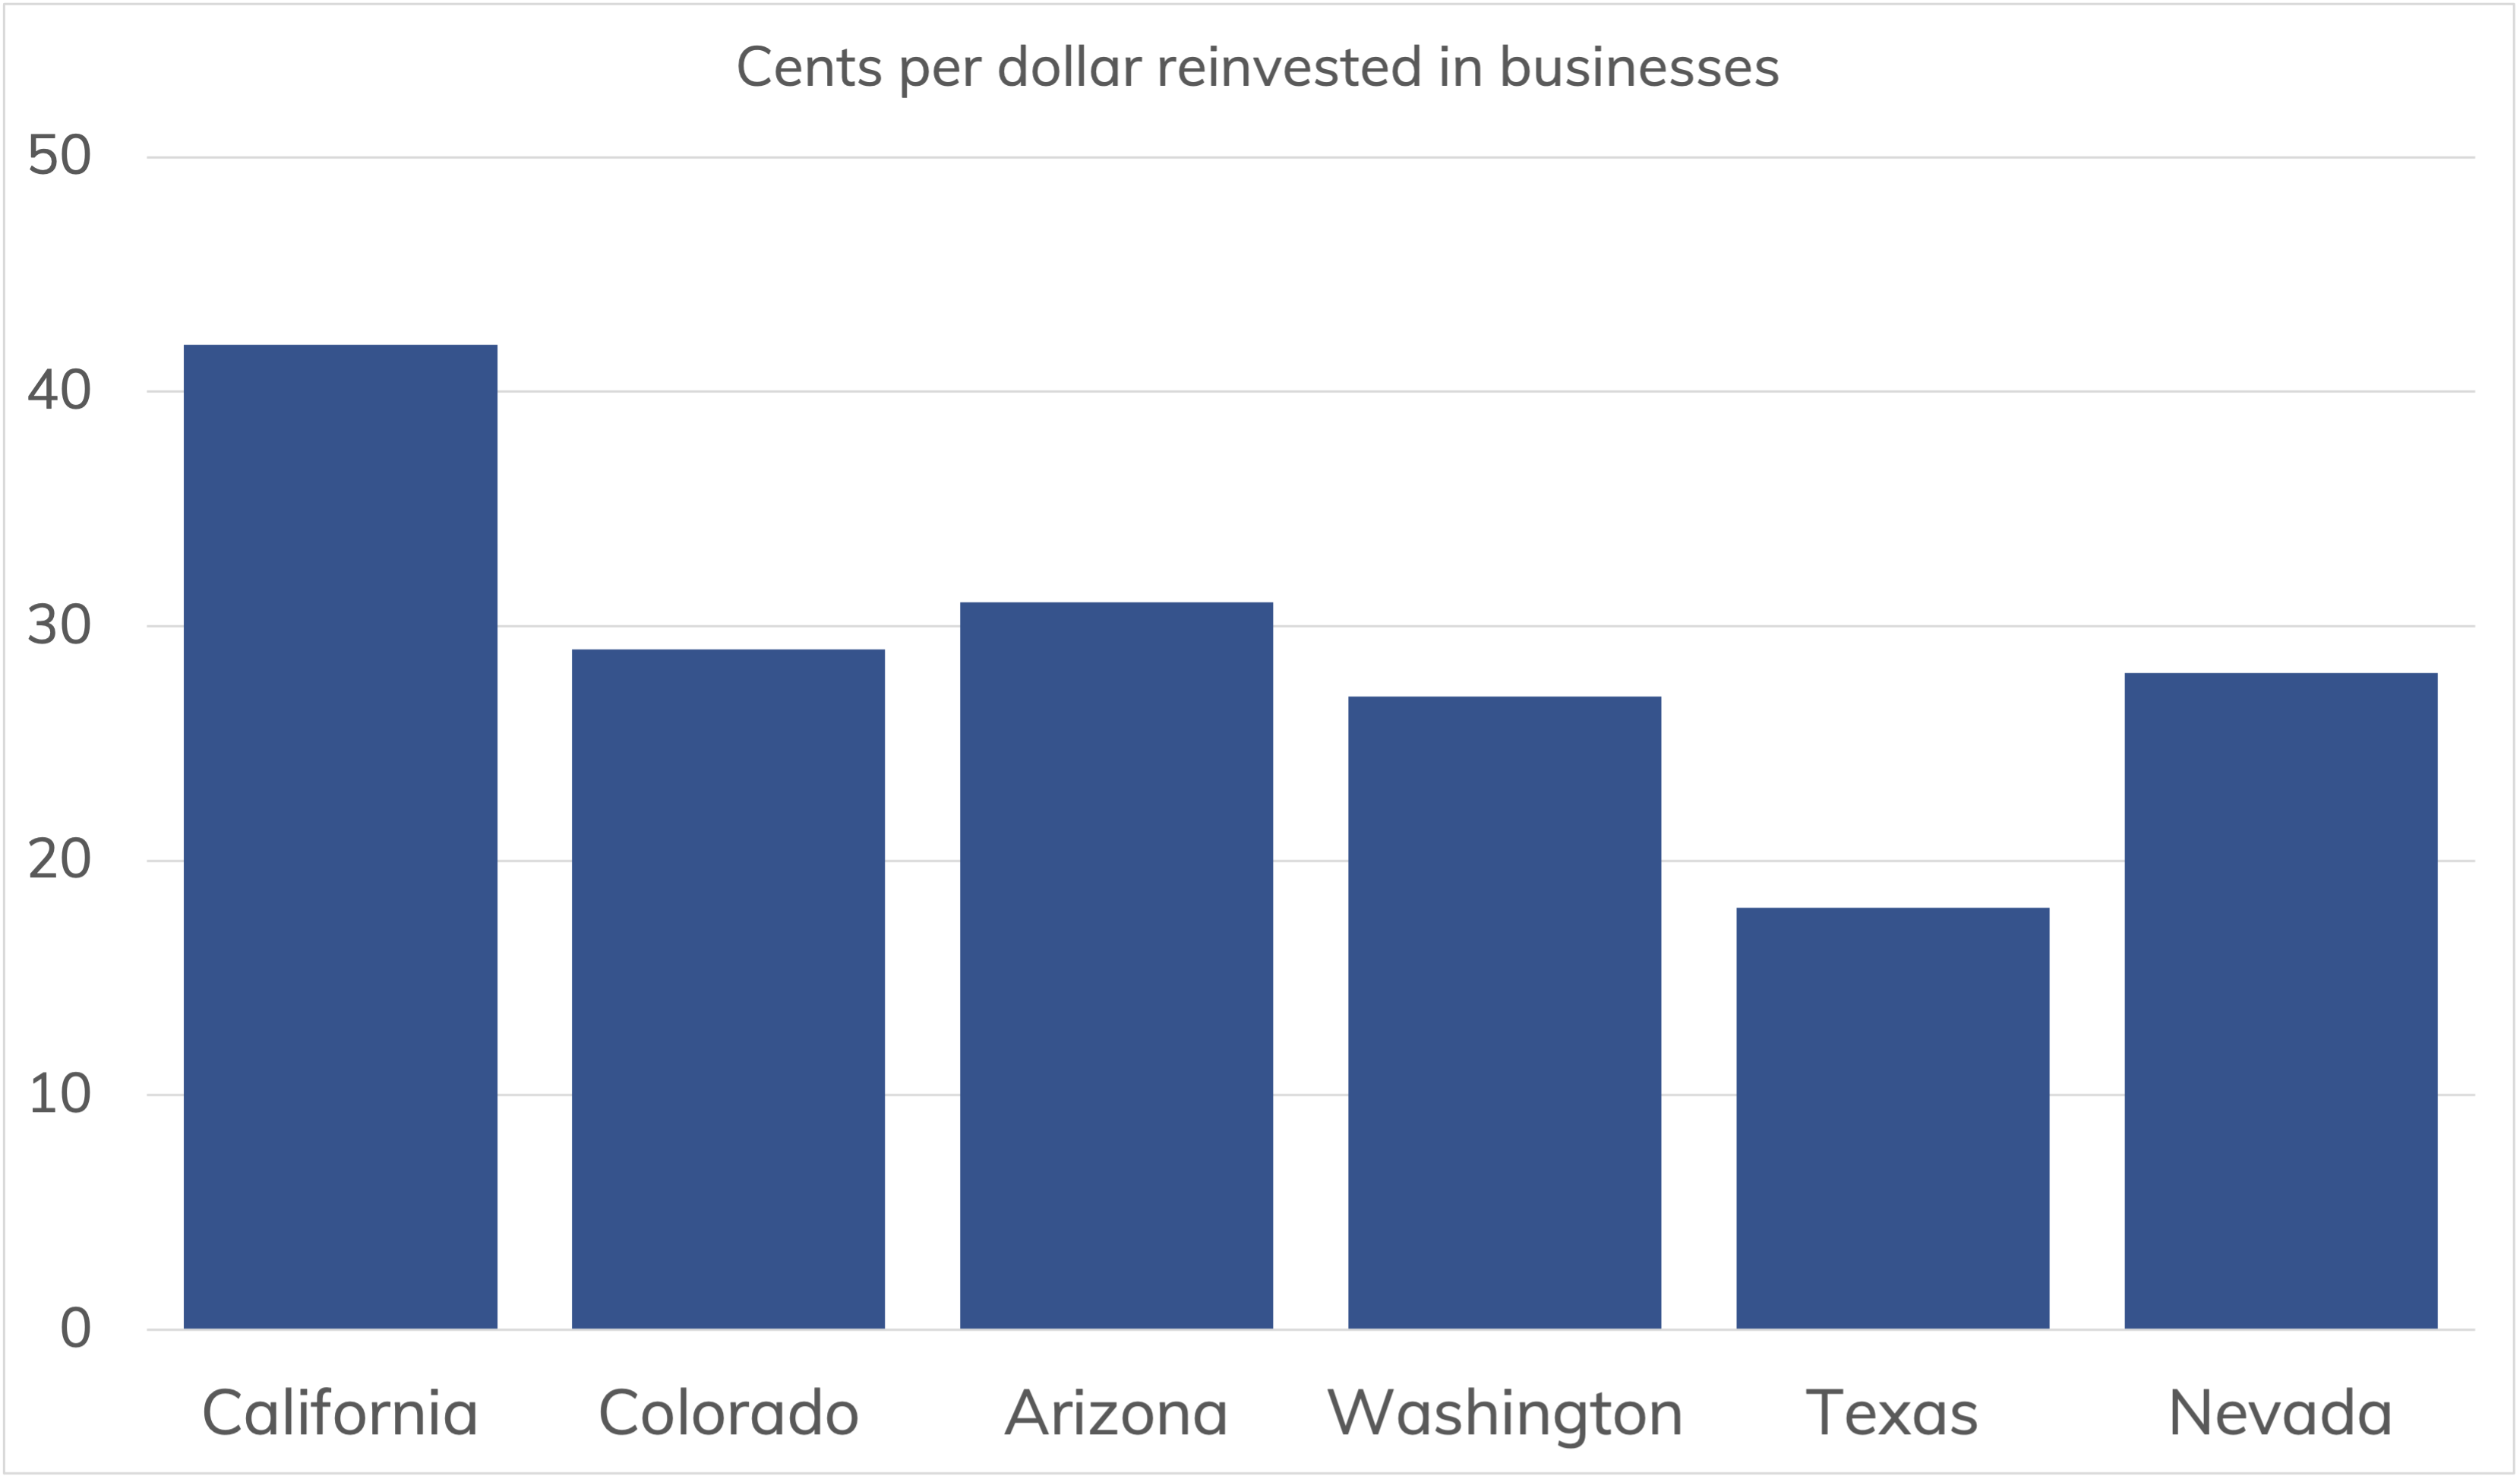 chart displaying California having the highest cents per dollar reinvested in businesses compared to Colorado, Arizona, Washington, Texas and Nevada